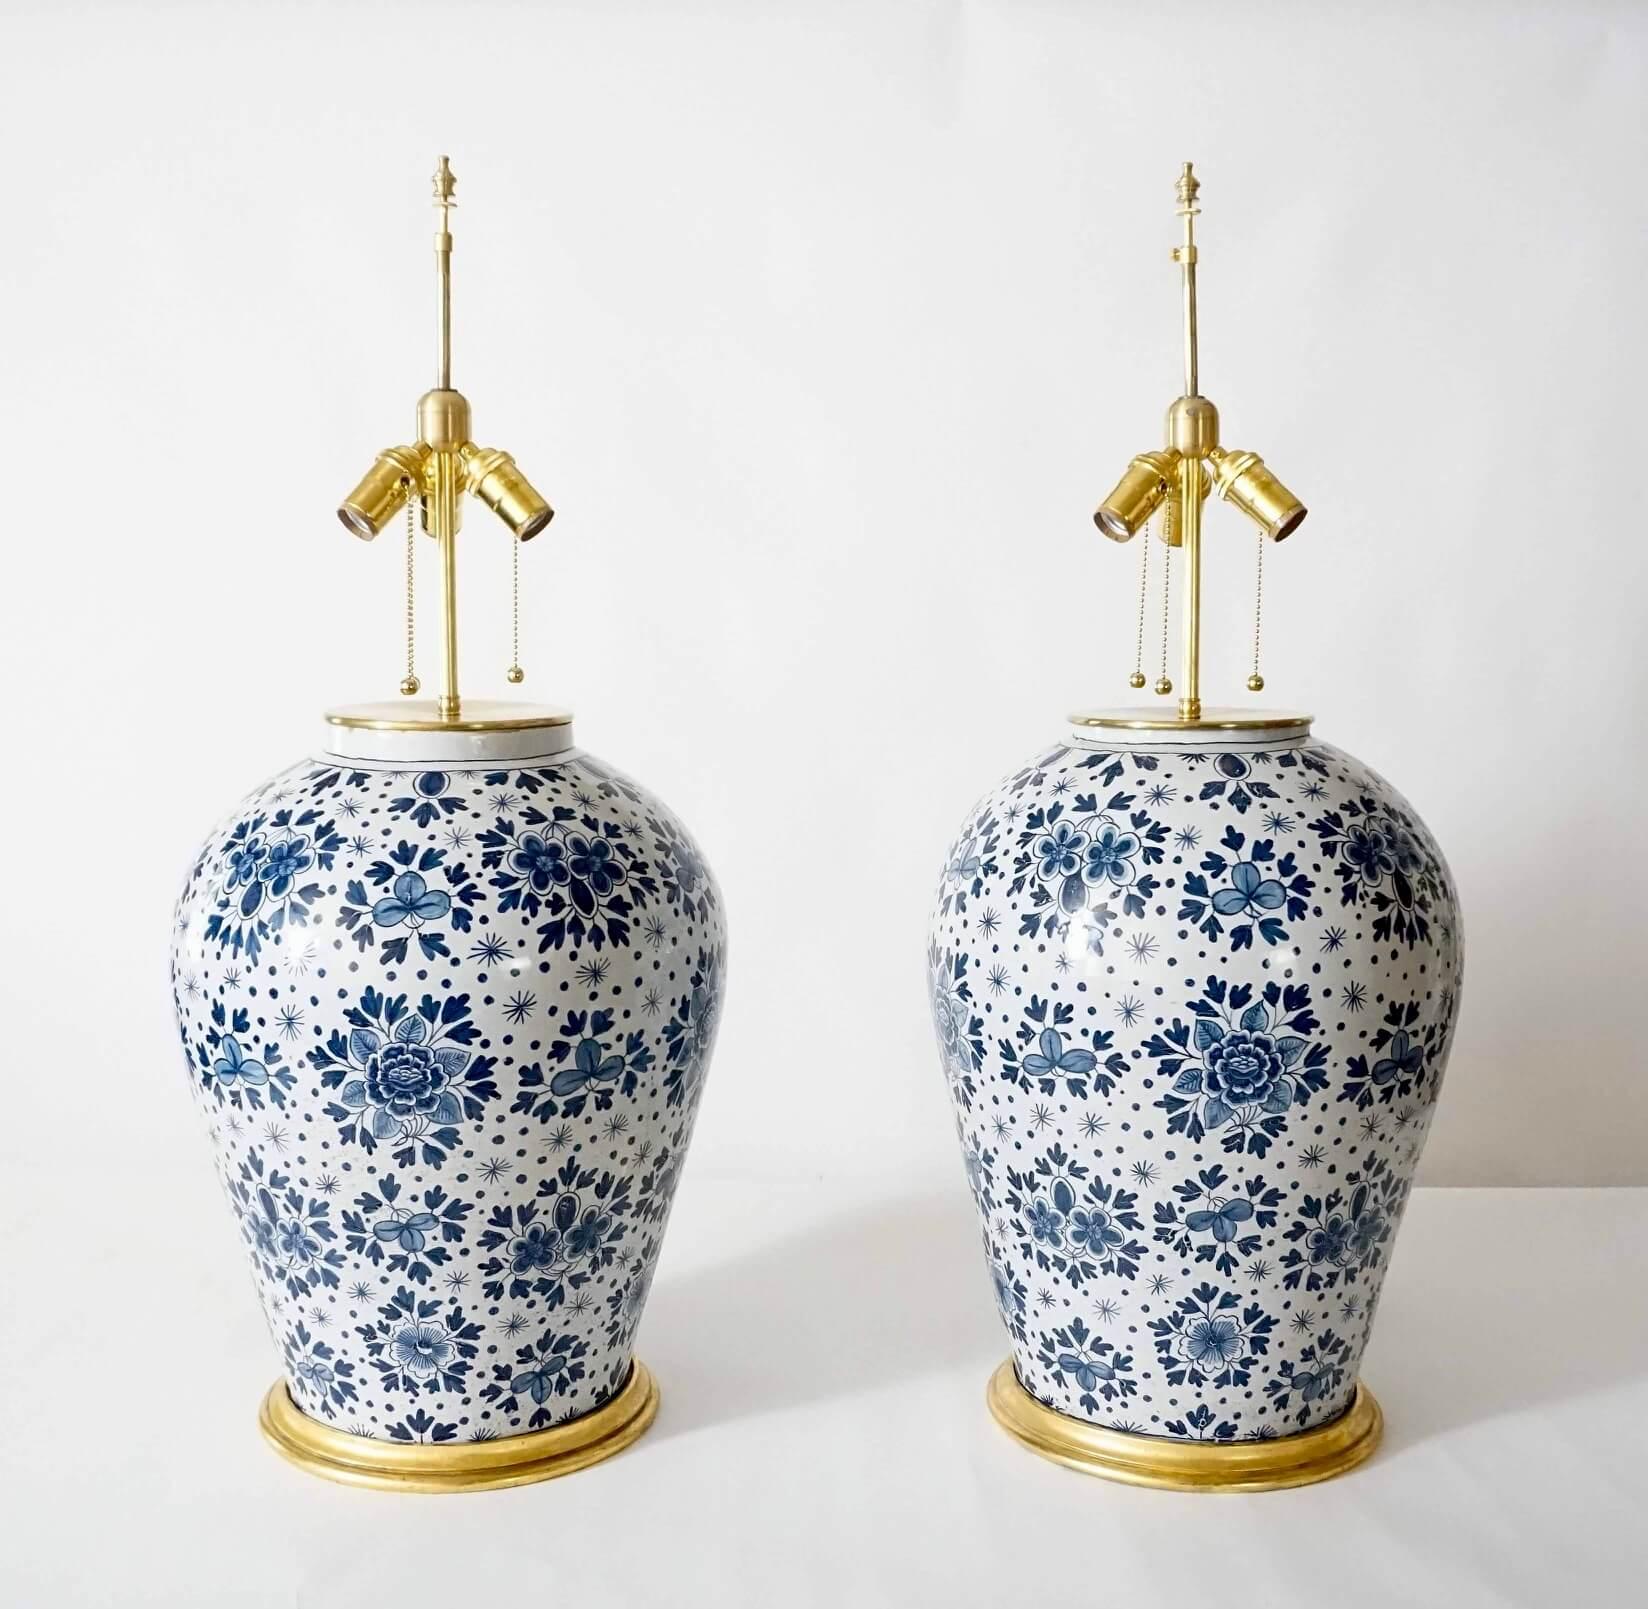 Pair of Large Scale Blue and White Dutch Delft Vase Table Lamps, circa 1850 For Sale 6